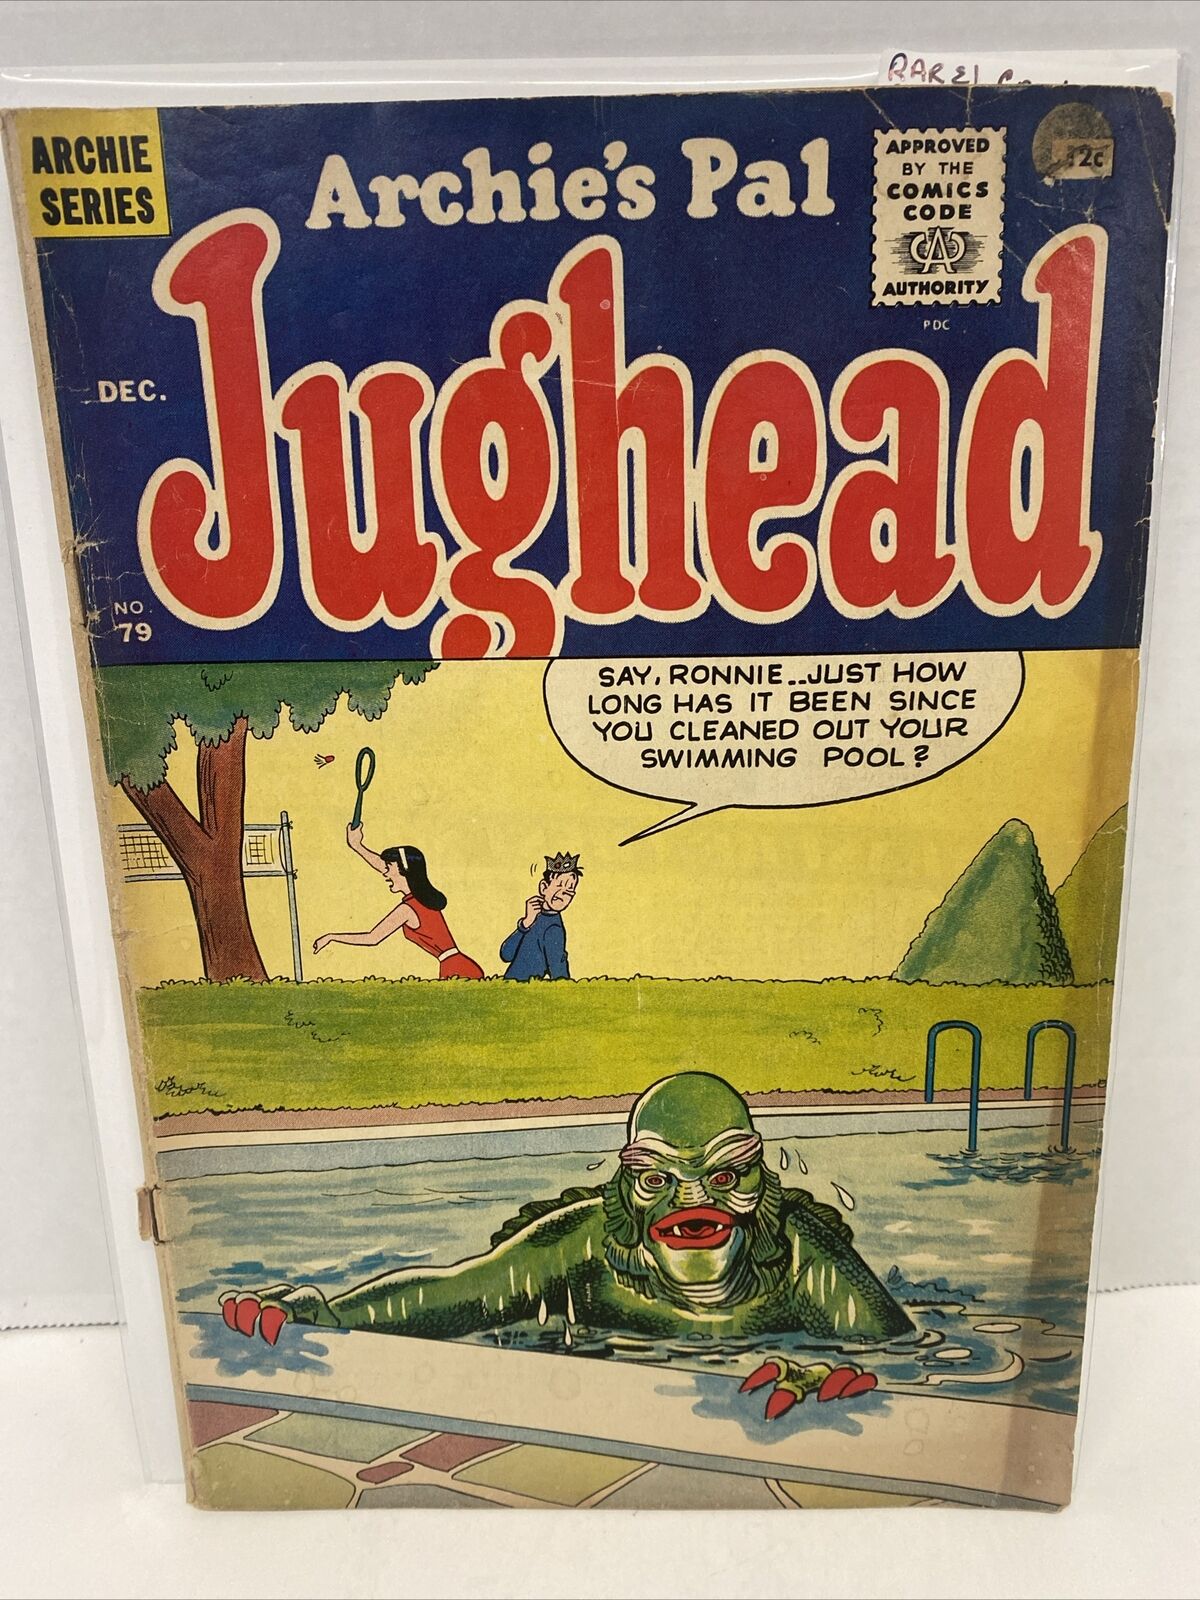 Archie's Pal Jughead #79 December 1961 Creature from the Black Lagoon, Scarce